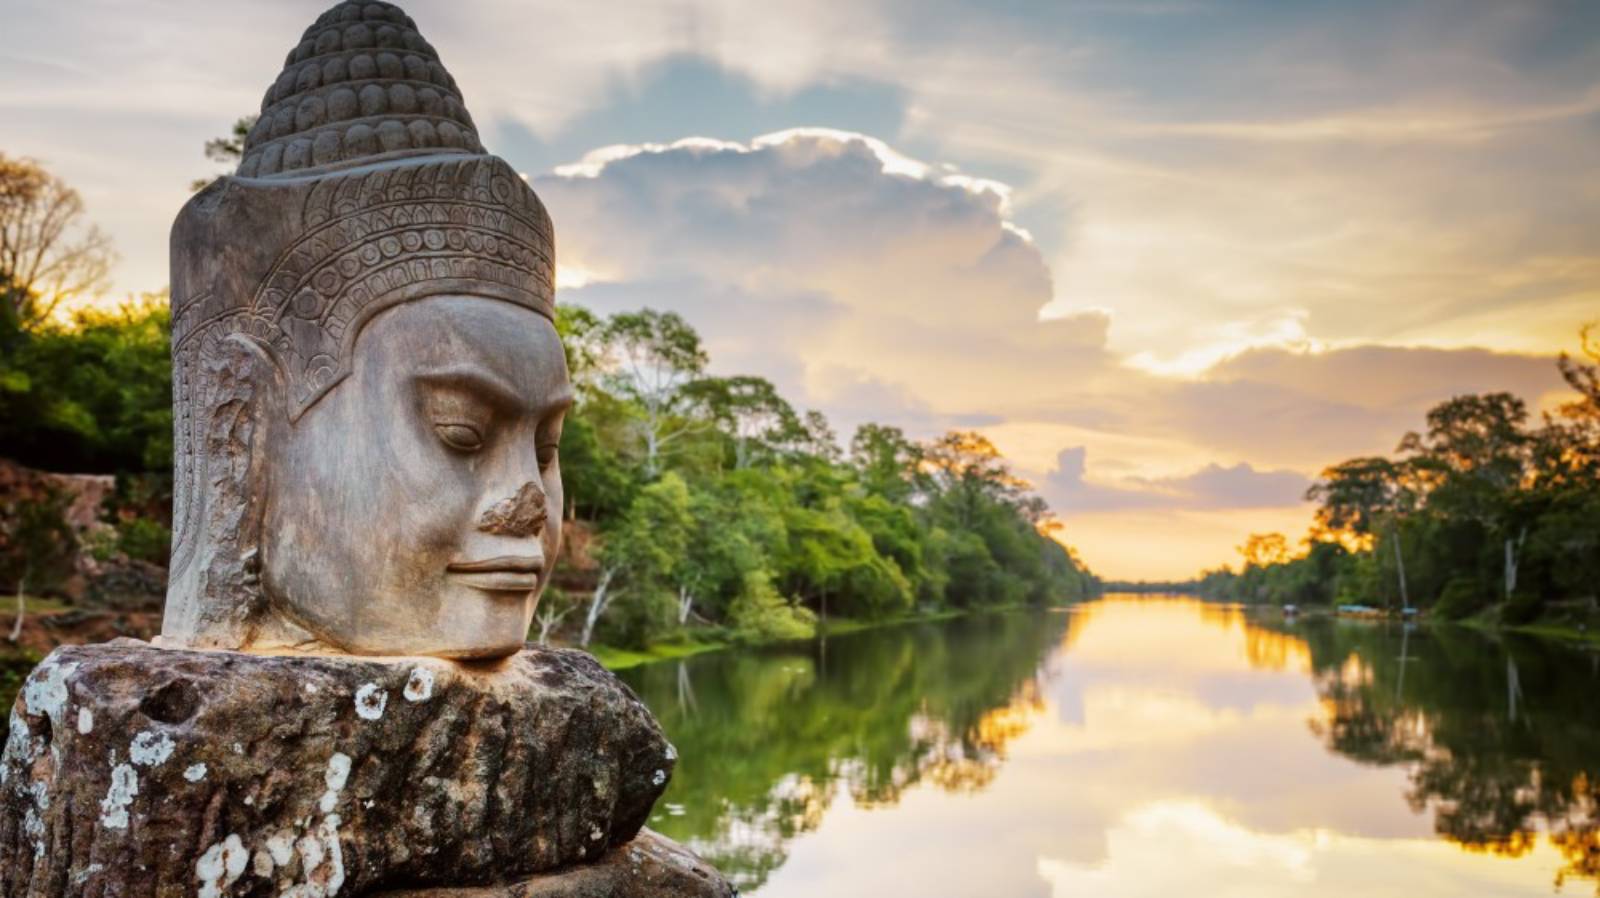 Cambodia in August: Lush Greenery and Weather Tips